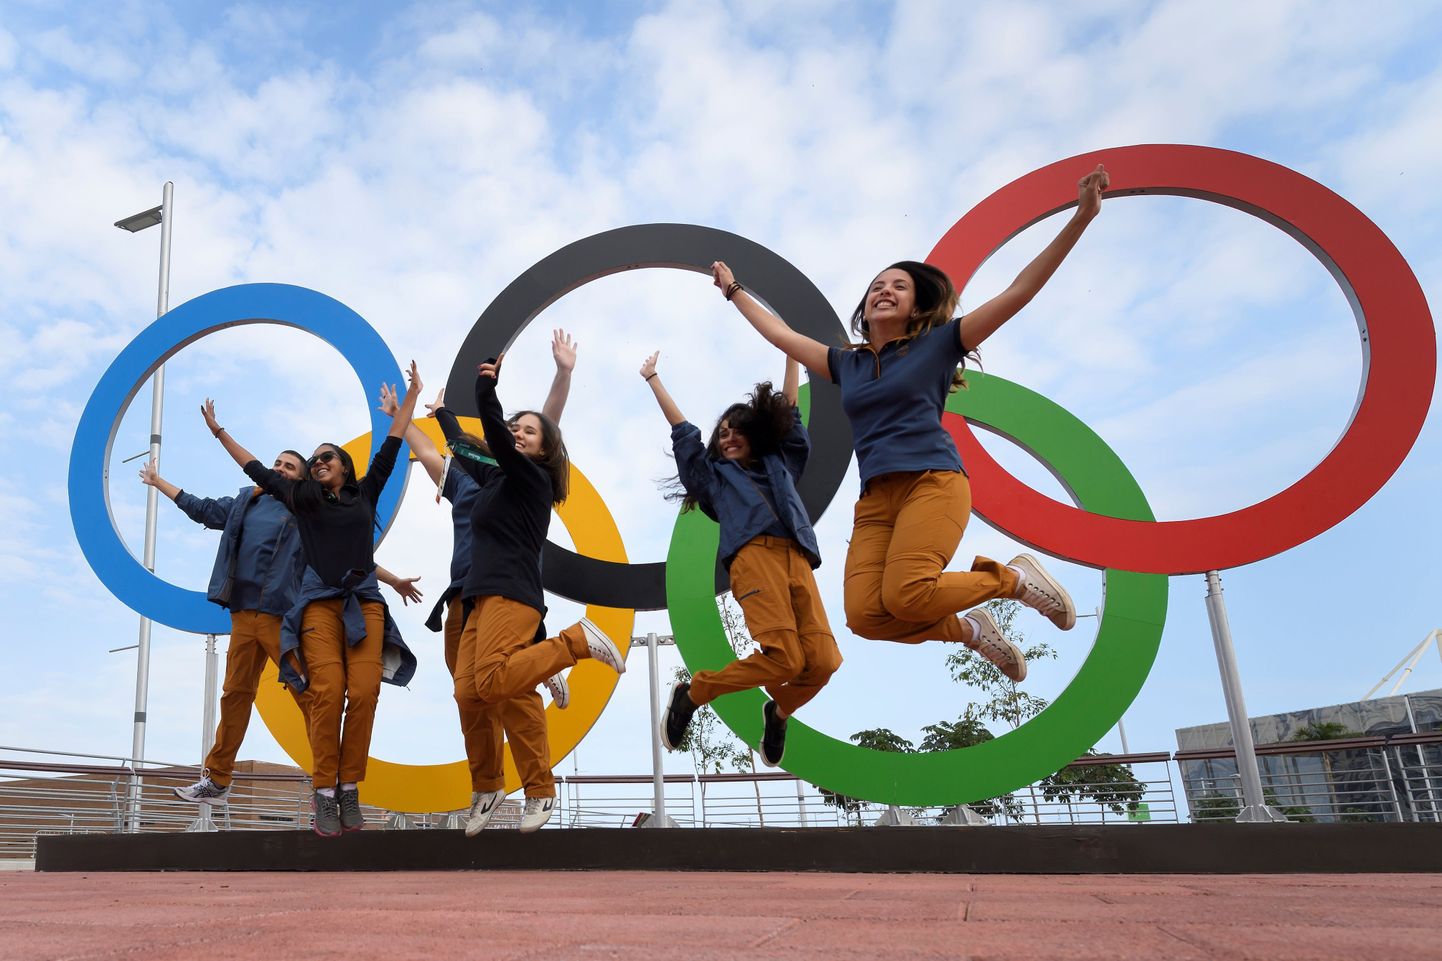 People jump for a picture in front of Olympic Rings set at the Olympic park in Rio de Janeiro on August 3, 2016.